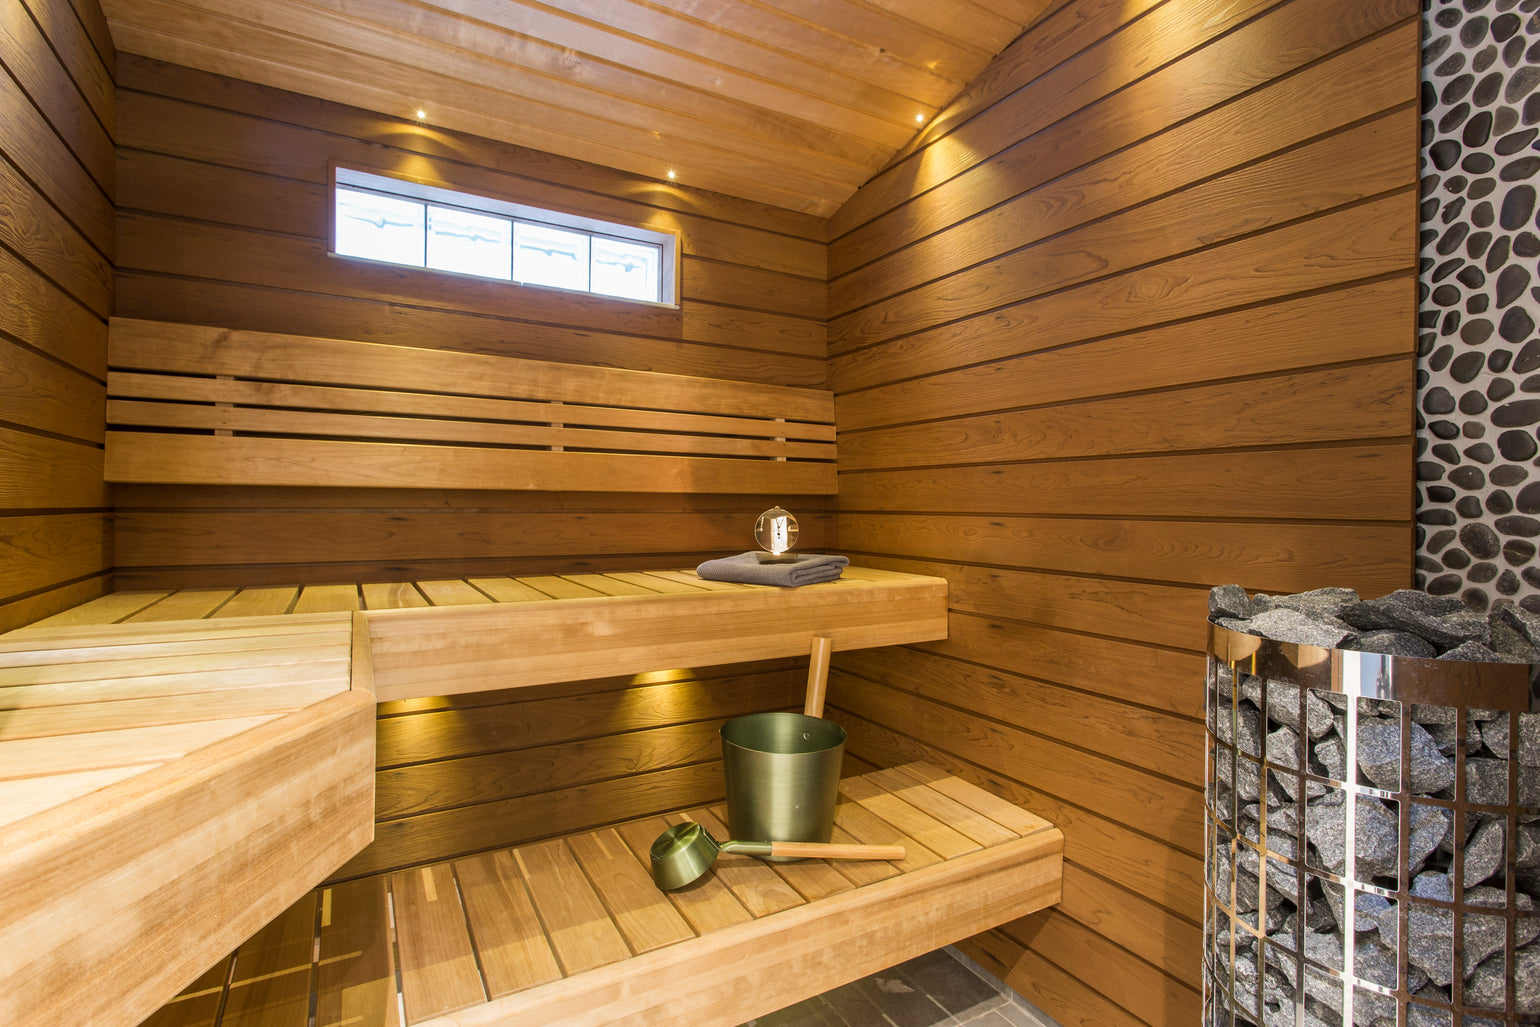 A sauna with accessories on the benches